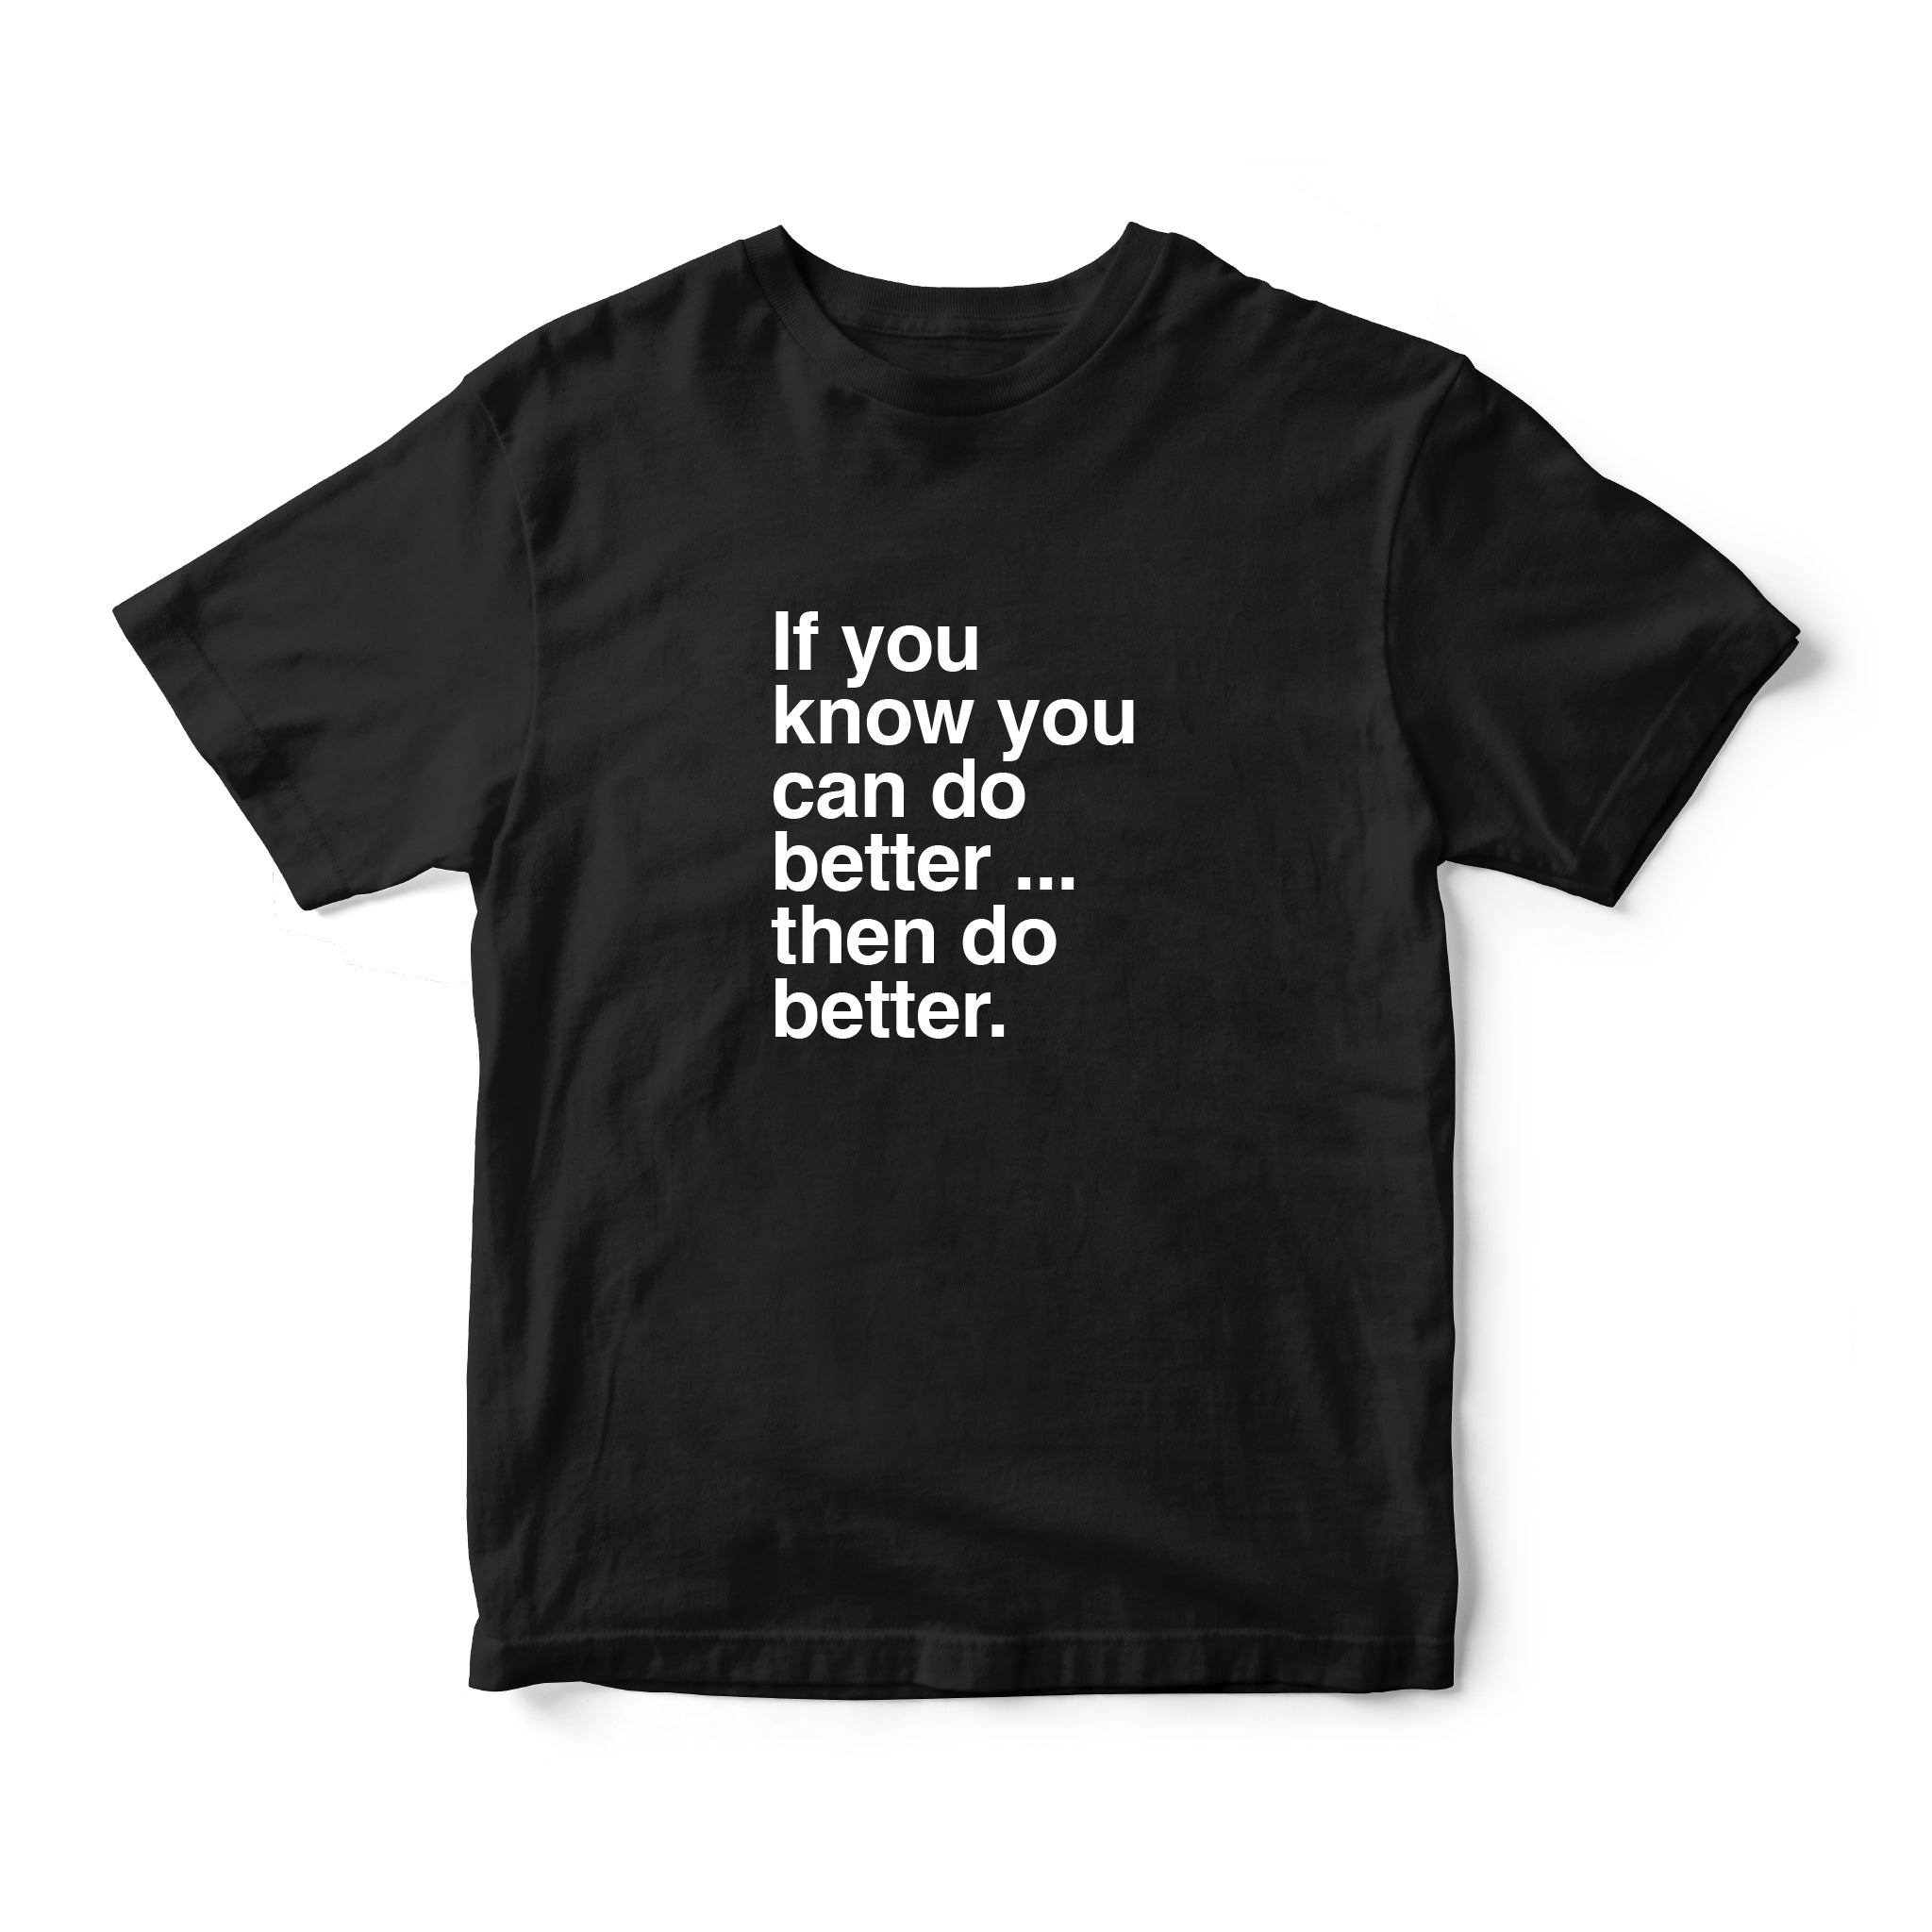 Instee You Can Do Better T-shirt Unisex 100% Cotton